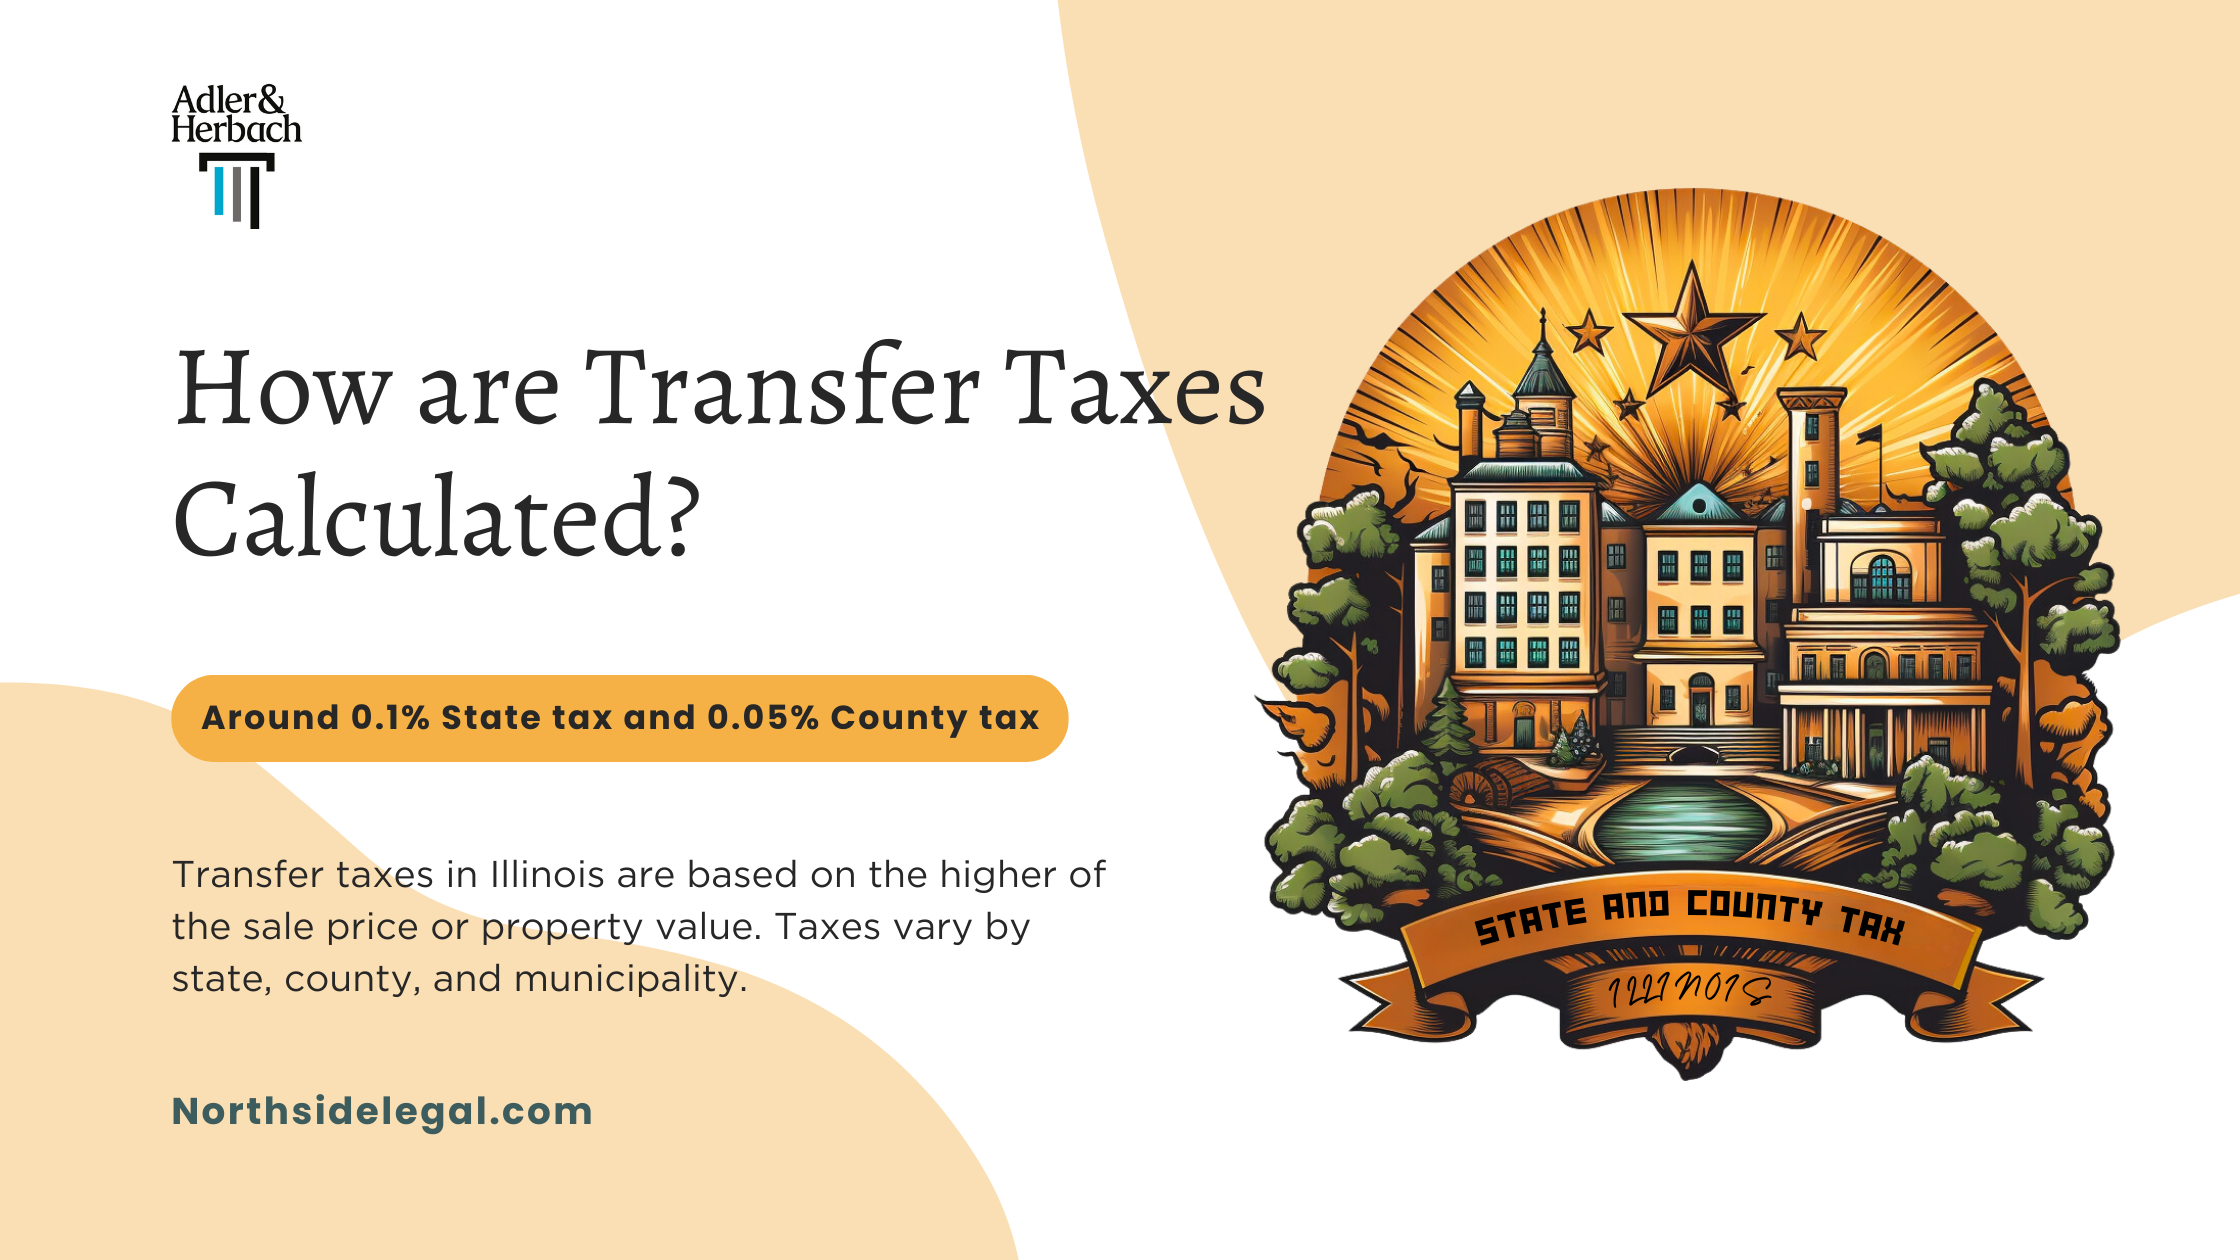 How are Transfer Taxes Calculated in Illinois?